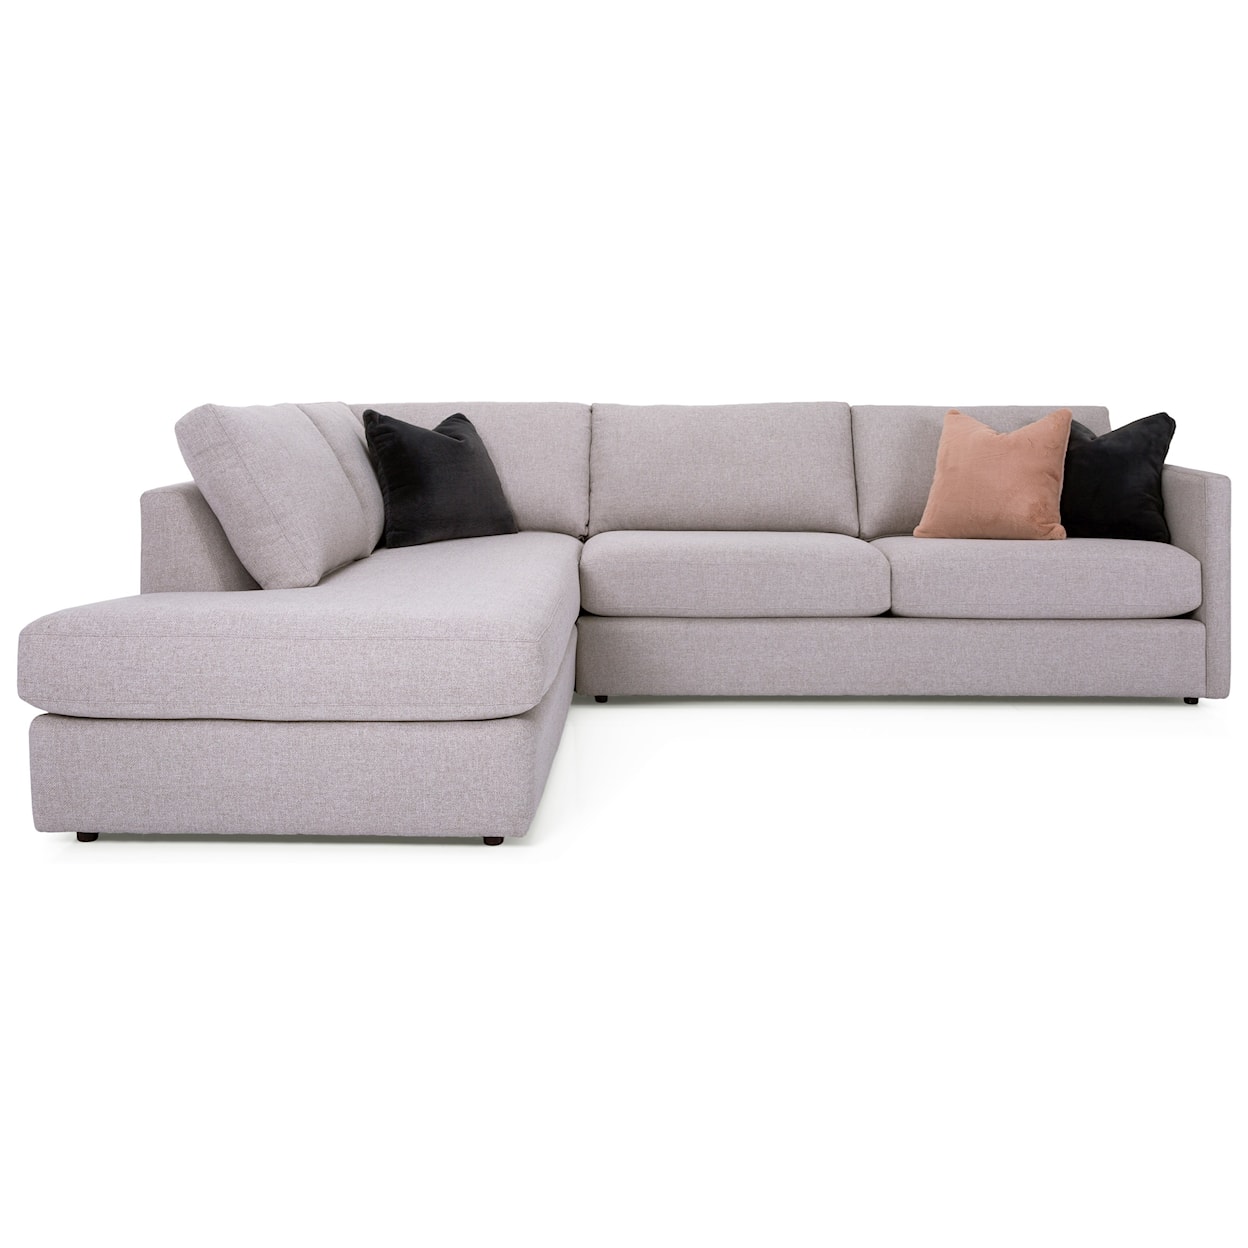 Decor-Rest 2068 Sectional with Chaise